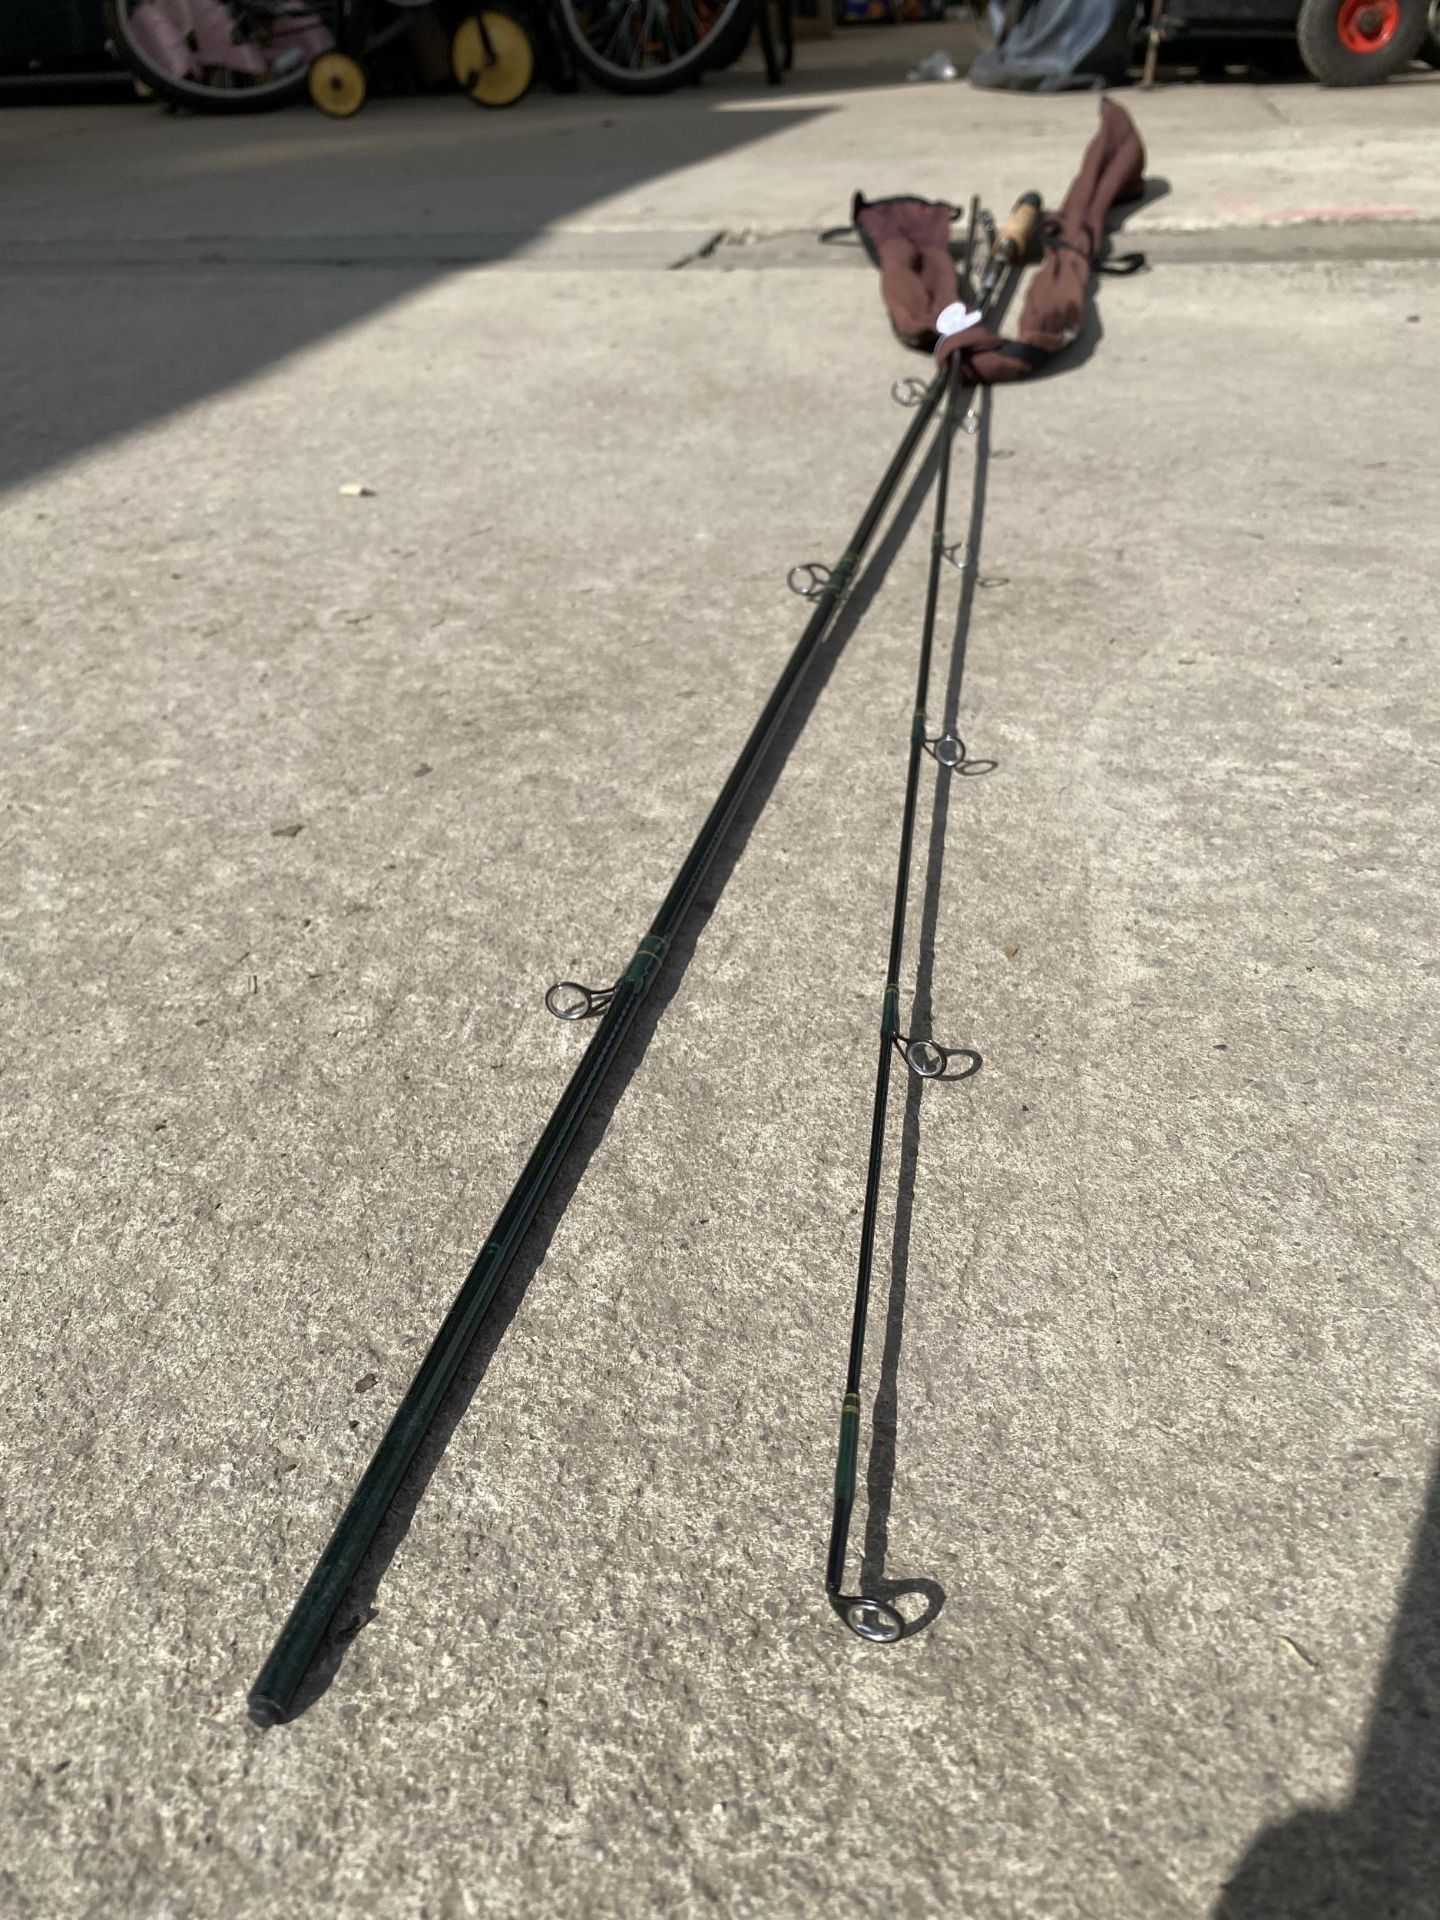 AN ABU GARCIA CONOLON 1000 FISHING ROD WITH CASE - Image 3 of 3